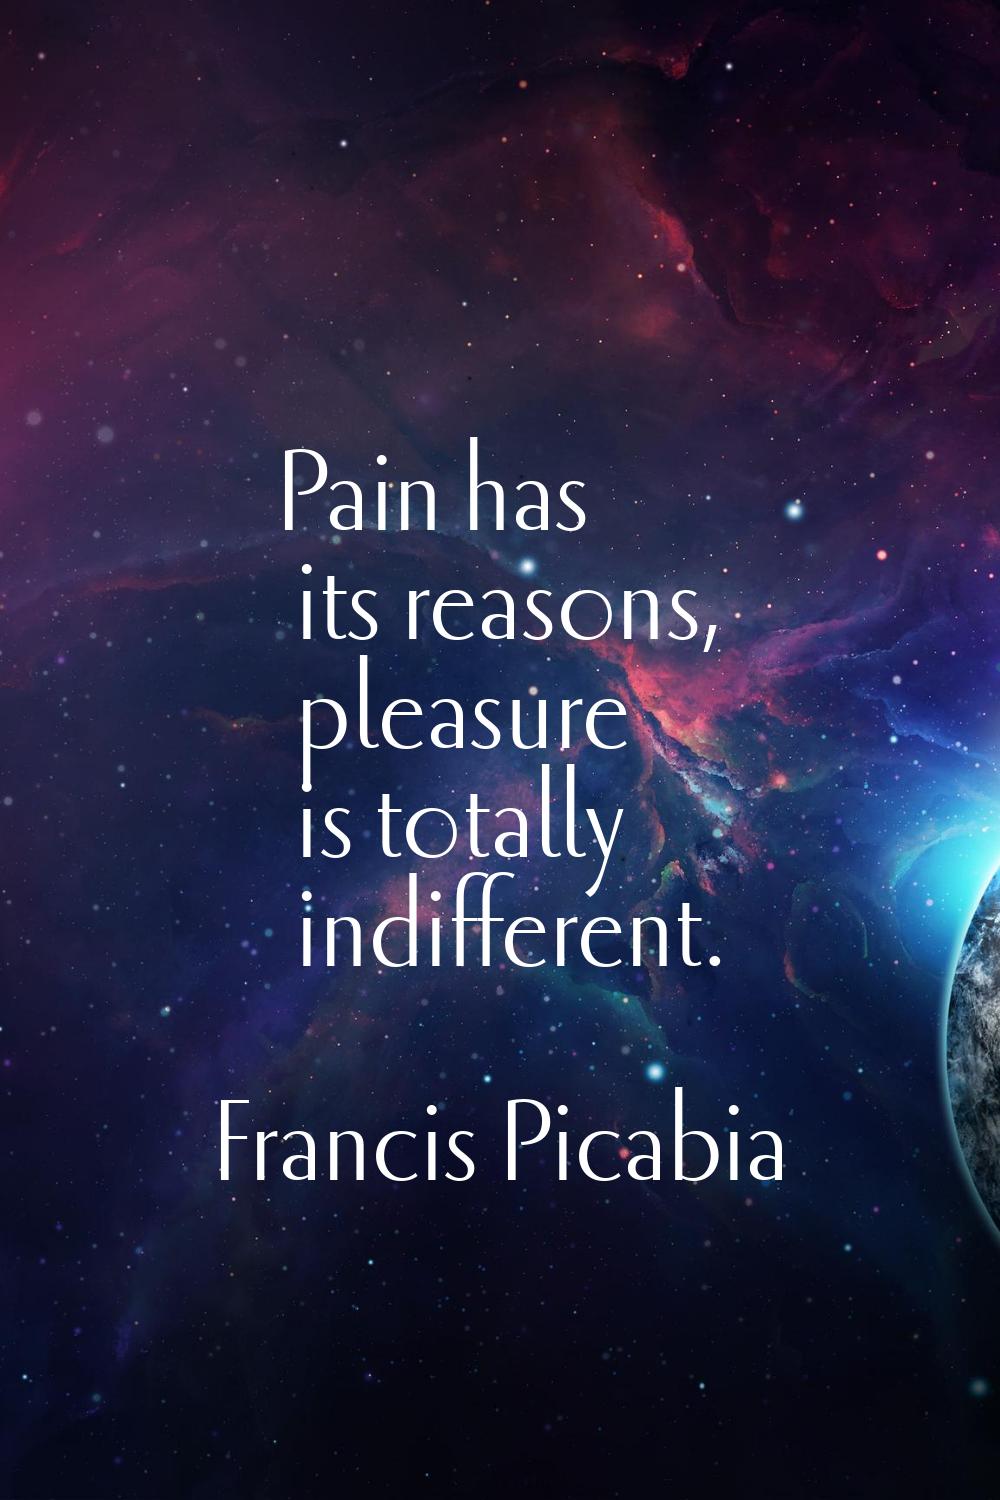 Pain has its reasons, pleasure is totally indifferent.